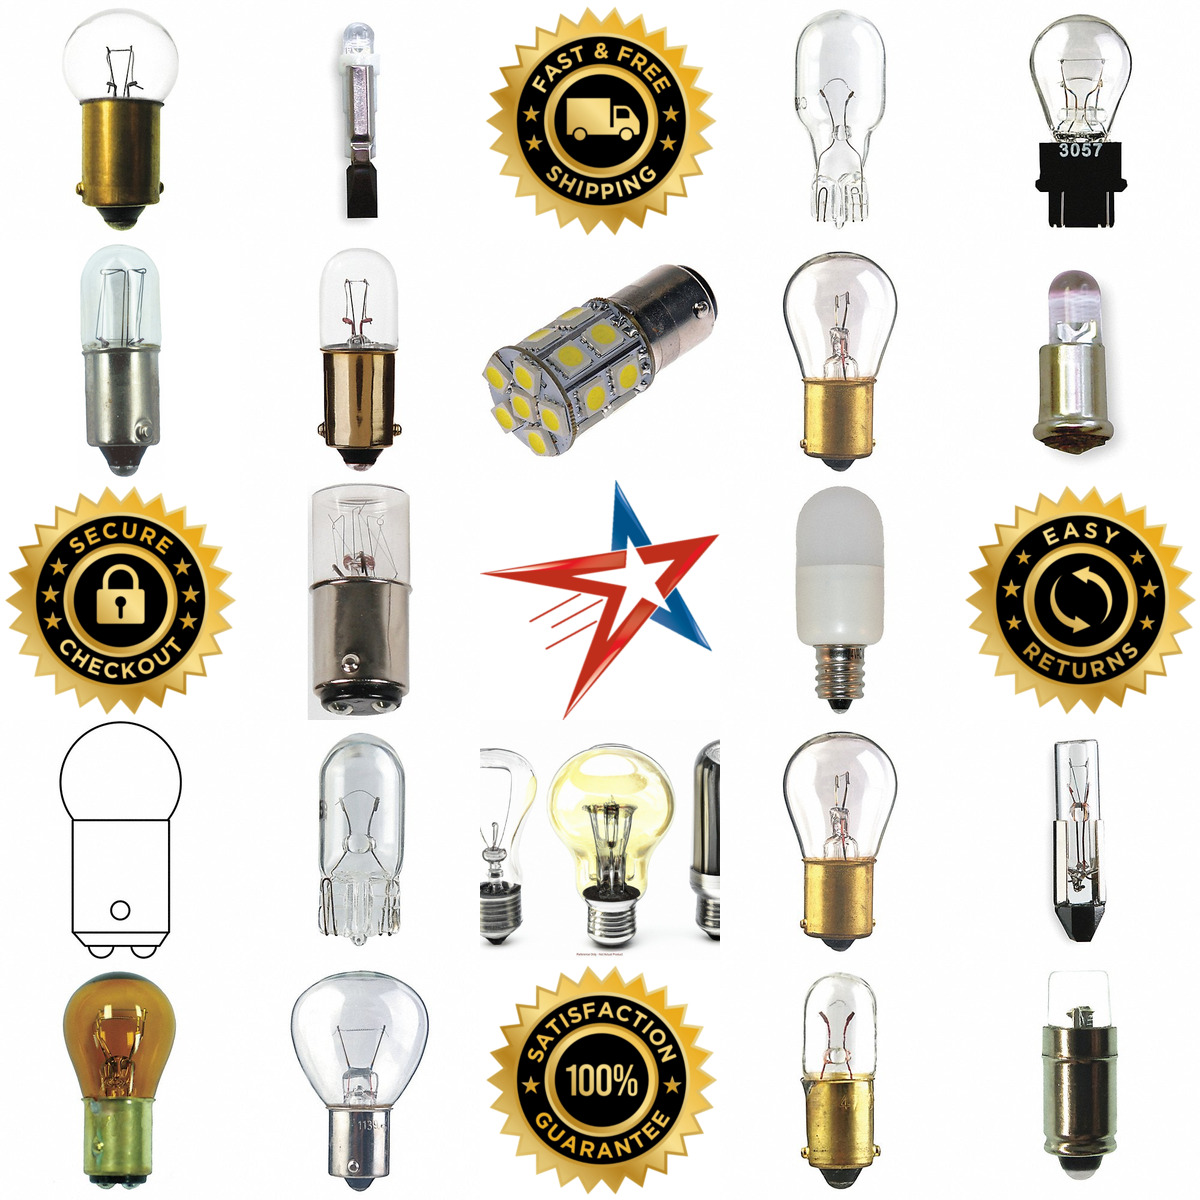 A selection of Miniature Lamps and Bulbs products on GoVets